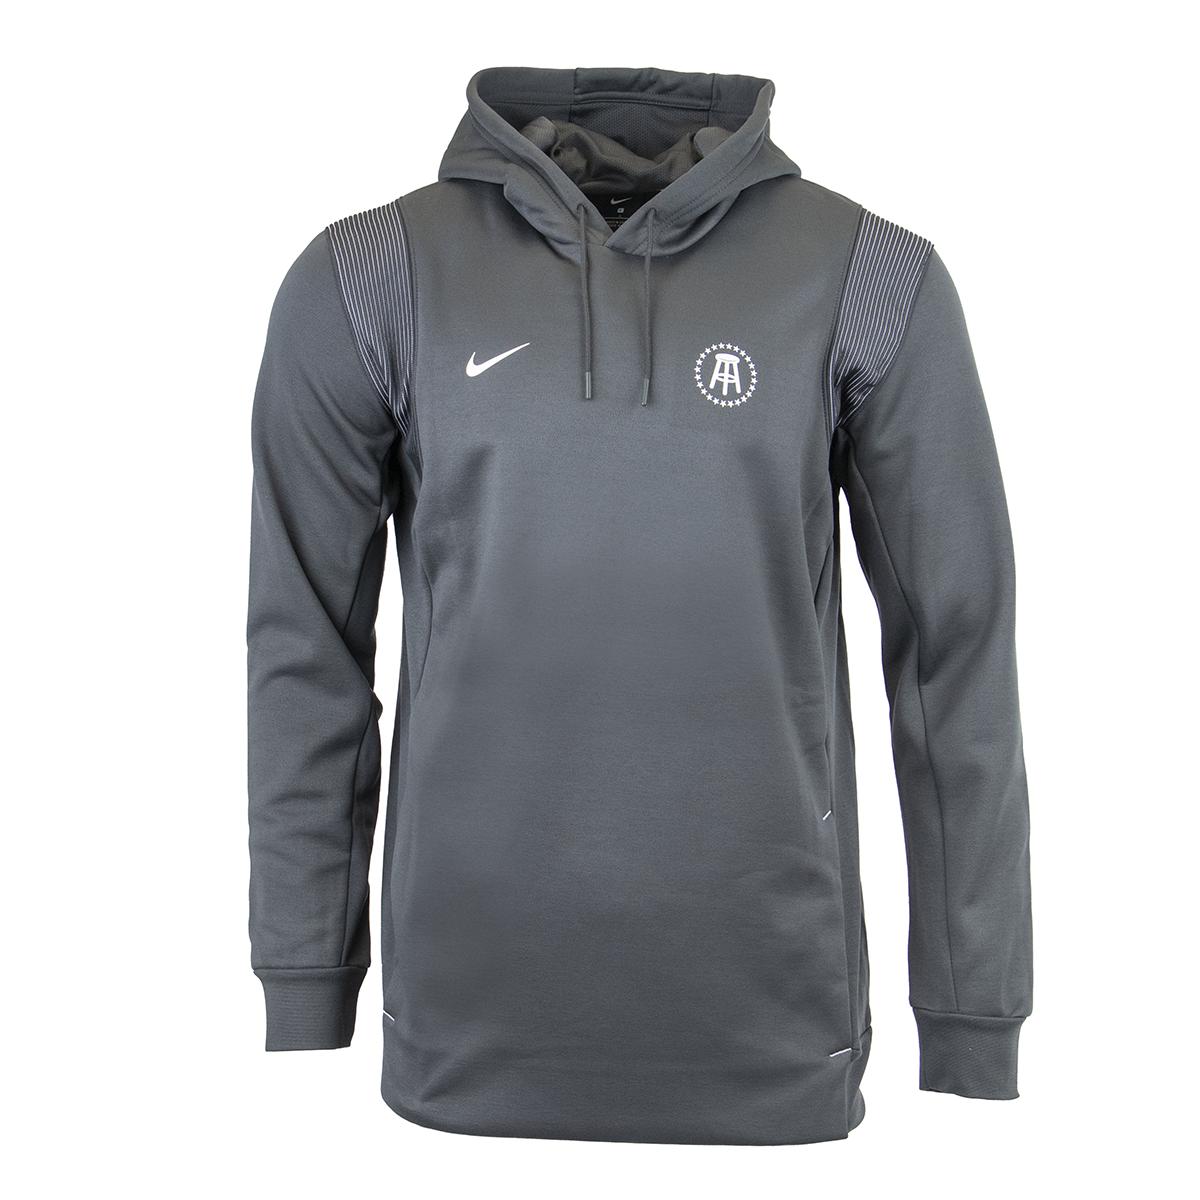 Barstool Sports Nike Therma Football Pullover Hoodie-Hoodies-Barstool Sports-Charcoal-S-Barstool Sports